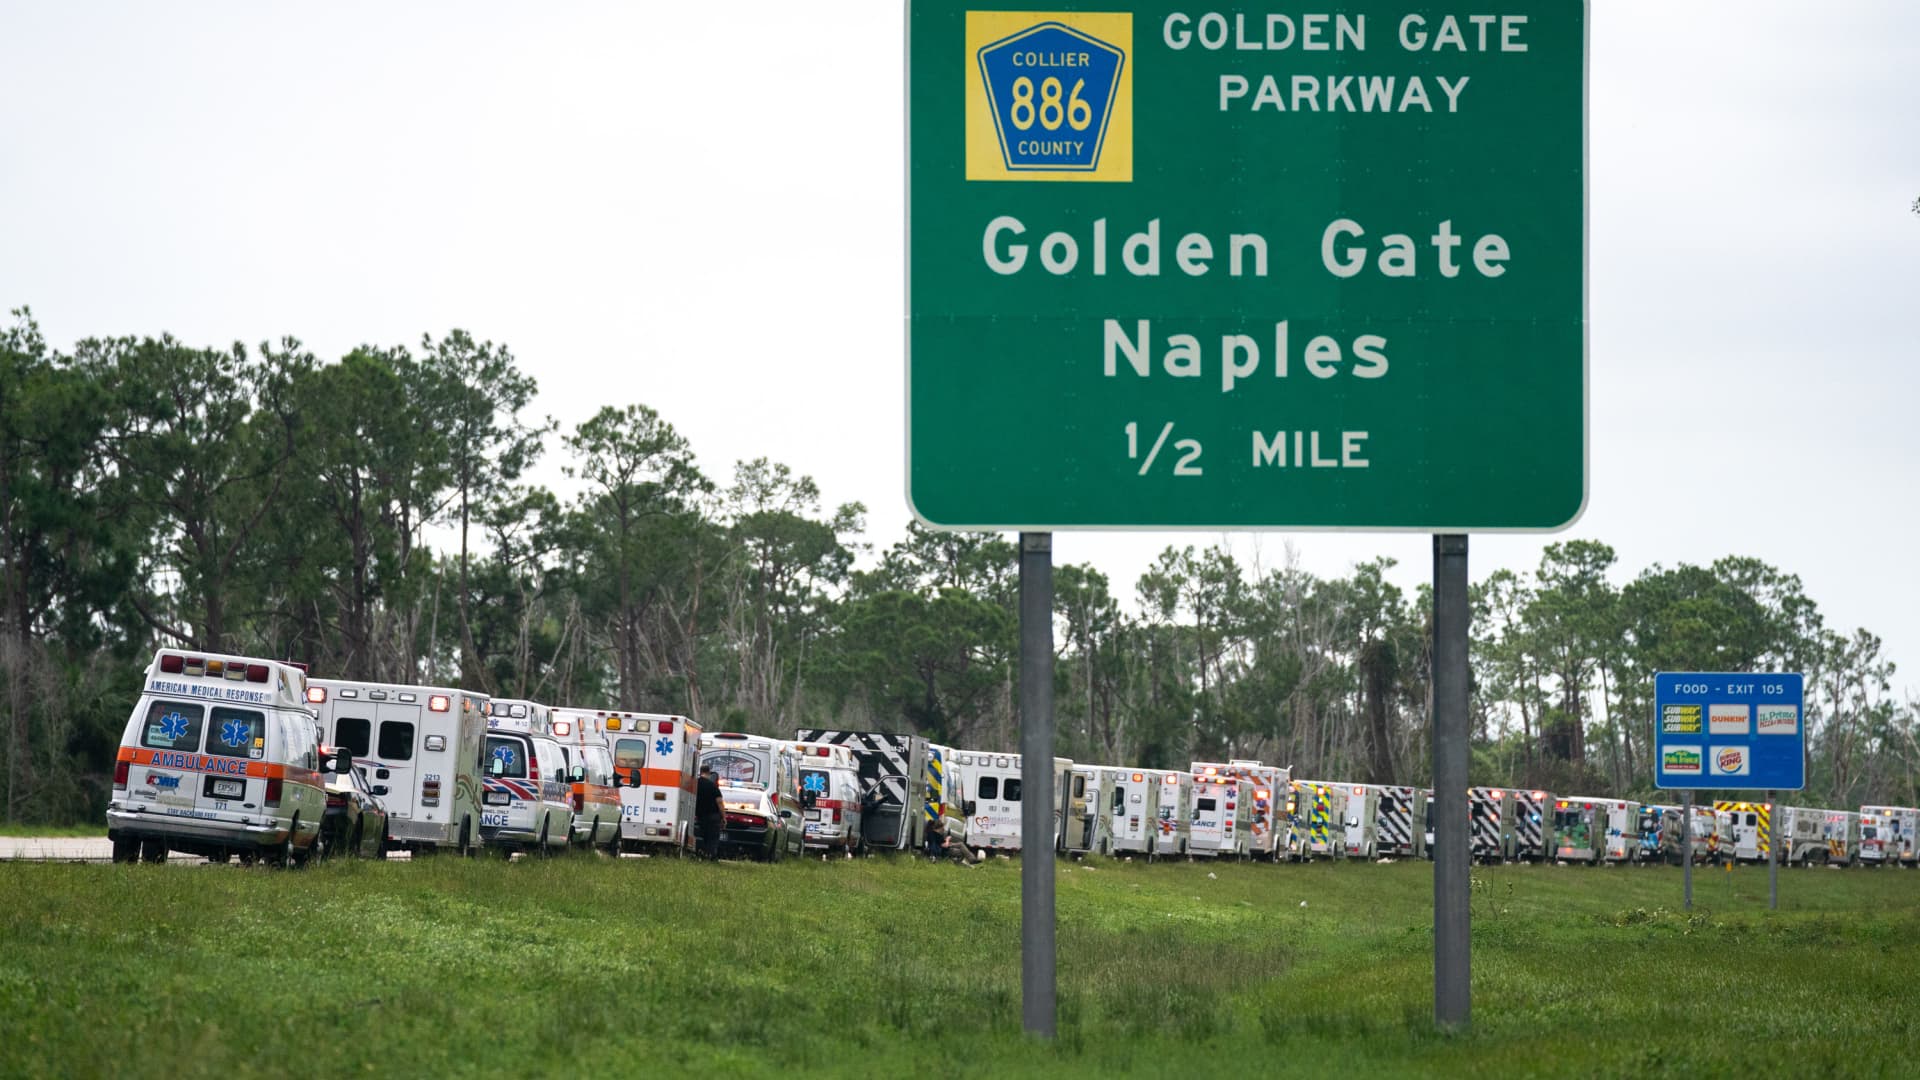 NAPLES, FL - SEPTEMBER 29: Ambulances line up on the shoulder after Hurricane Ian on September 29, 2022 in Naples, Florida. Hurricane Ian brought high winds, storm surge and rain to the area causing severe damage.(Photo by Sean Rayford/Getty Images)